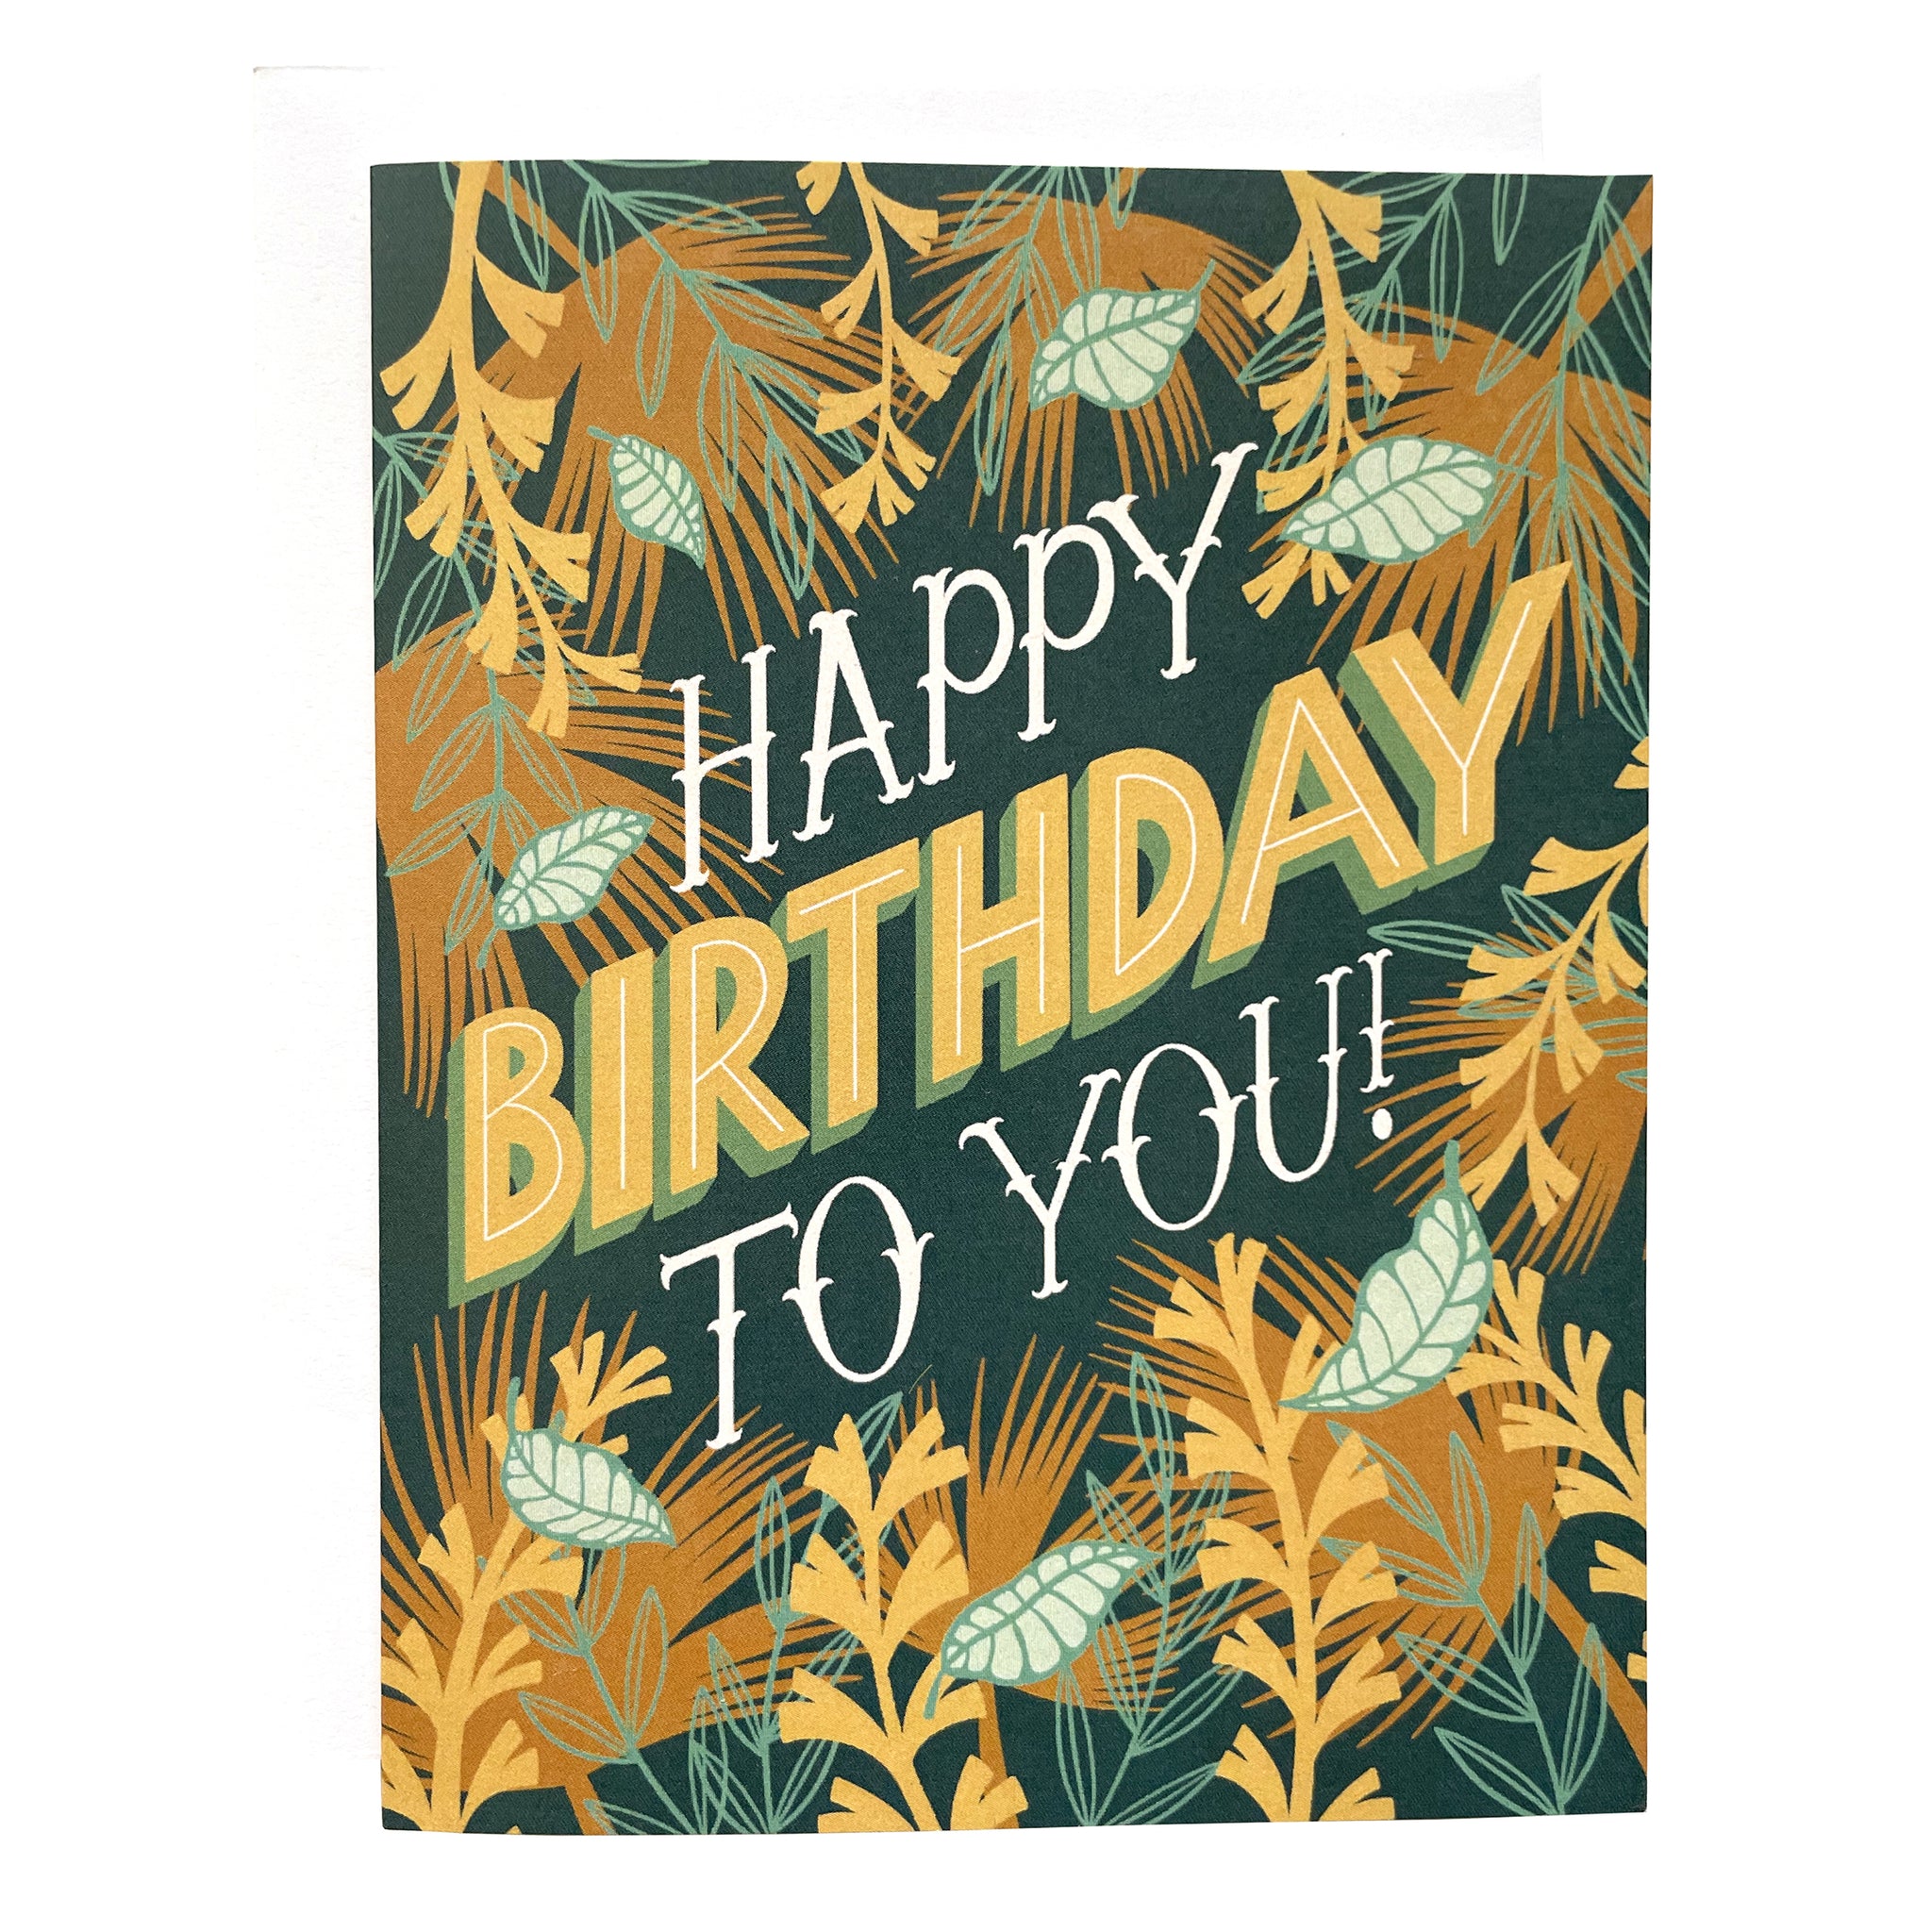 A dark blue greeting card features the hand-lettered words "Happy Birthday to you!". The letters are framed by illustrations of tropical leaves and vines. The card sits against a white envelope on a white background.